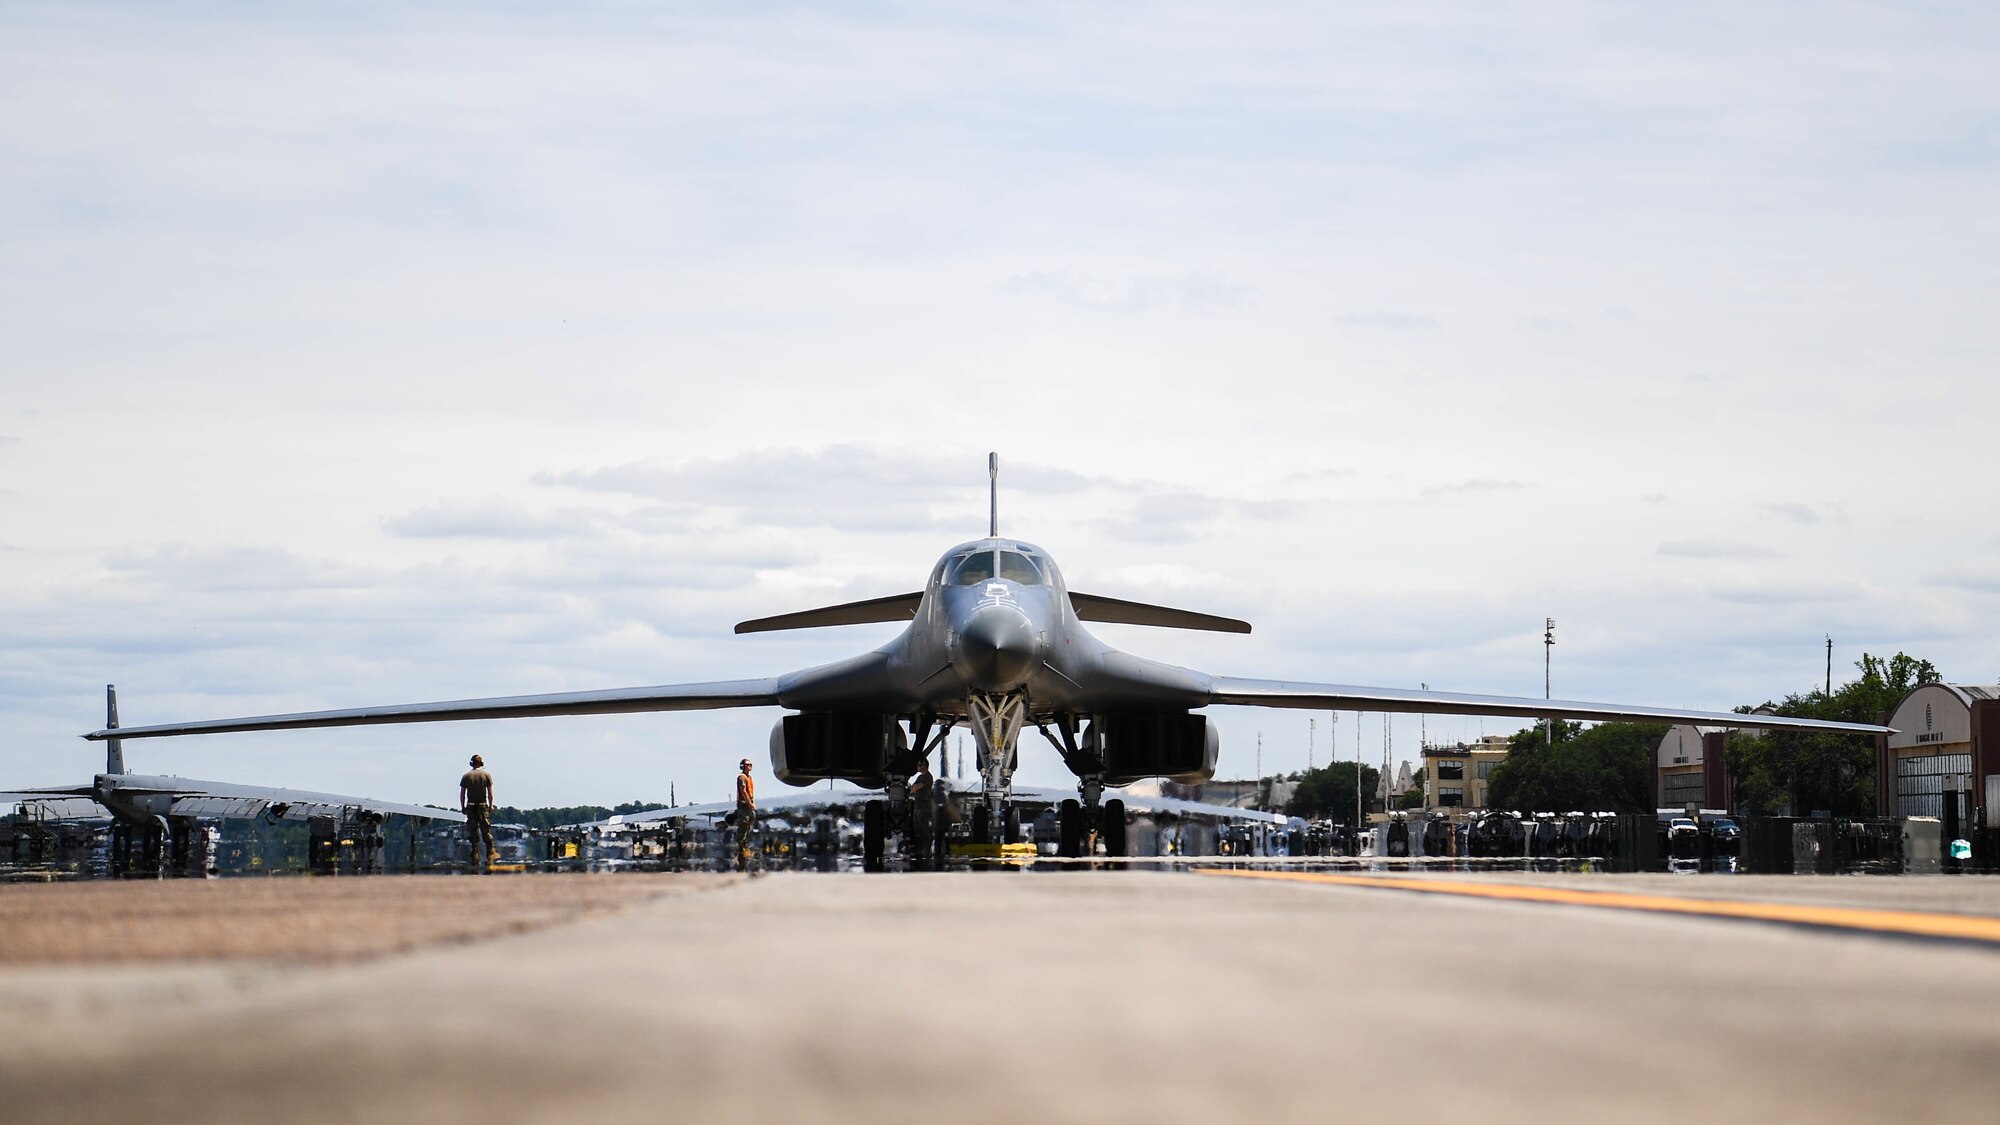 A B-1B Lancer from Dyess Air Force Base, Texas, parks on the flight line at Barksdale Air Force Base, Louisiana, June 22, 2021. The aircraft was flown to Barksdale to become decommissioned and displayed as a part of Barksdale's Global Power Museum airpark of static displays. (U.S. Air Force photo by Senior Airman Jacob B. Wrightsman)